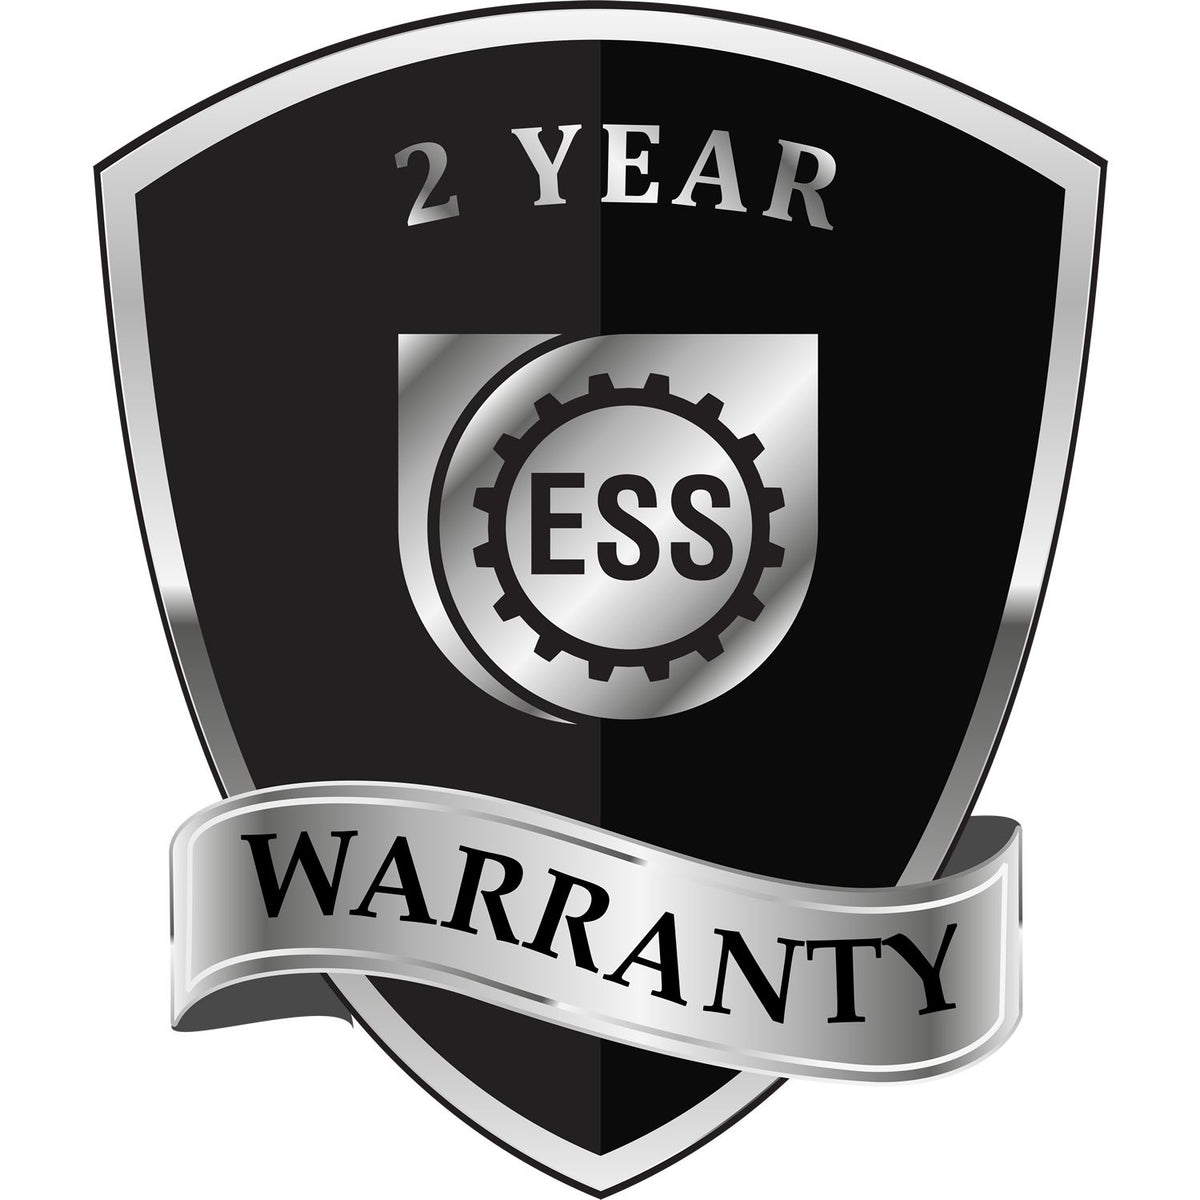 A black and silver badge or emblem showing warranty information for the Gift Mississippi Geologist Seal